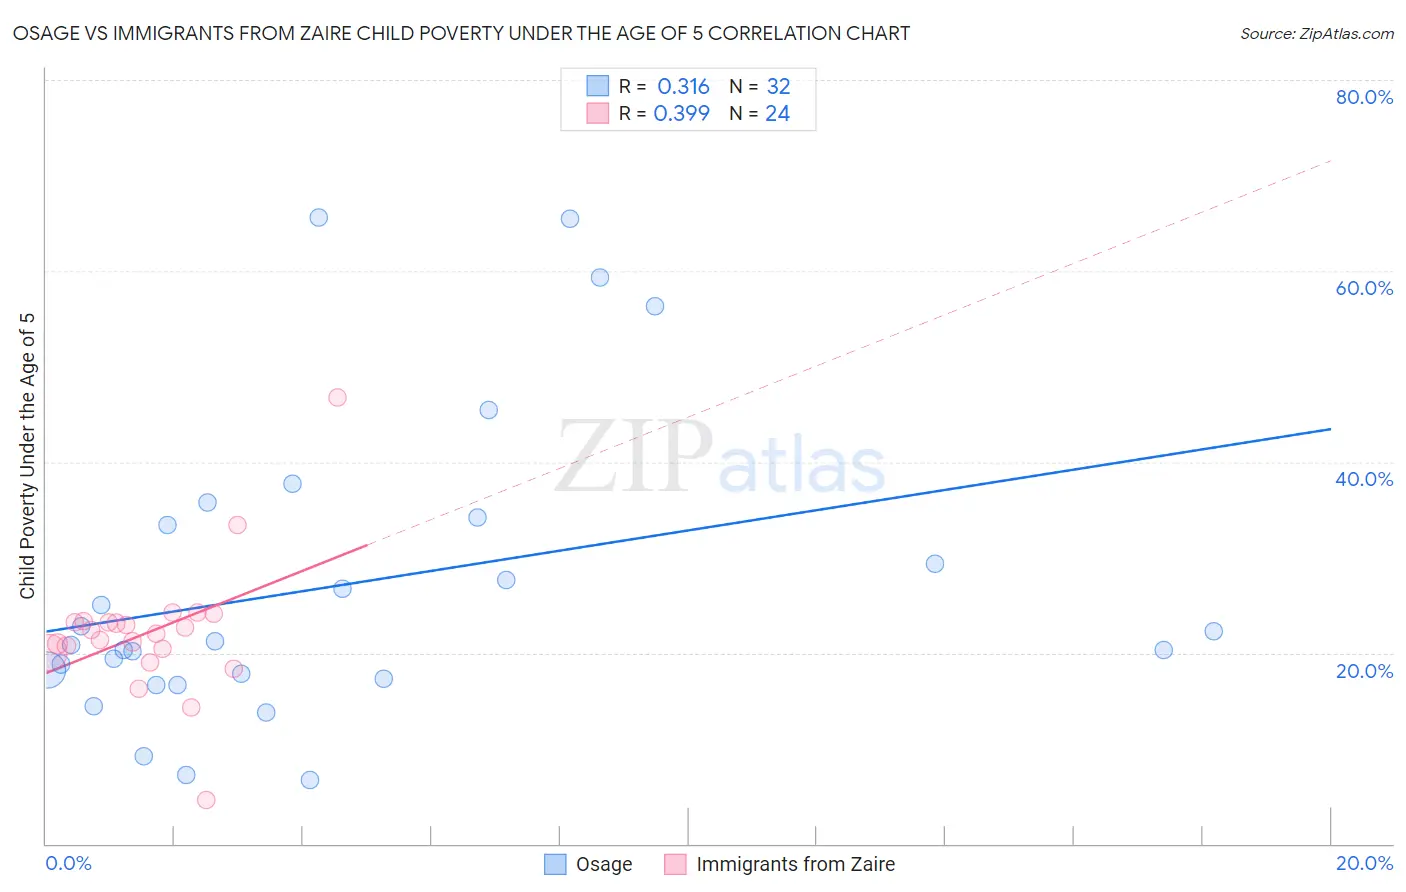 Osage vs Immigrants from Zaire Child Poverty Under the Age of 5